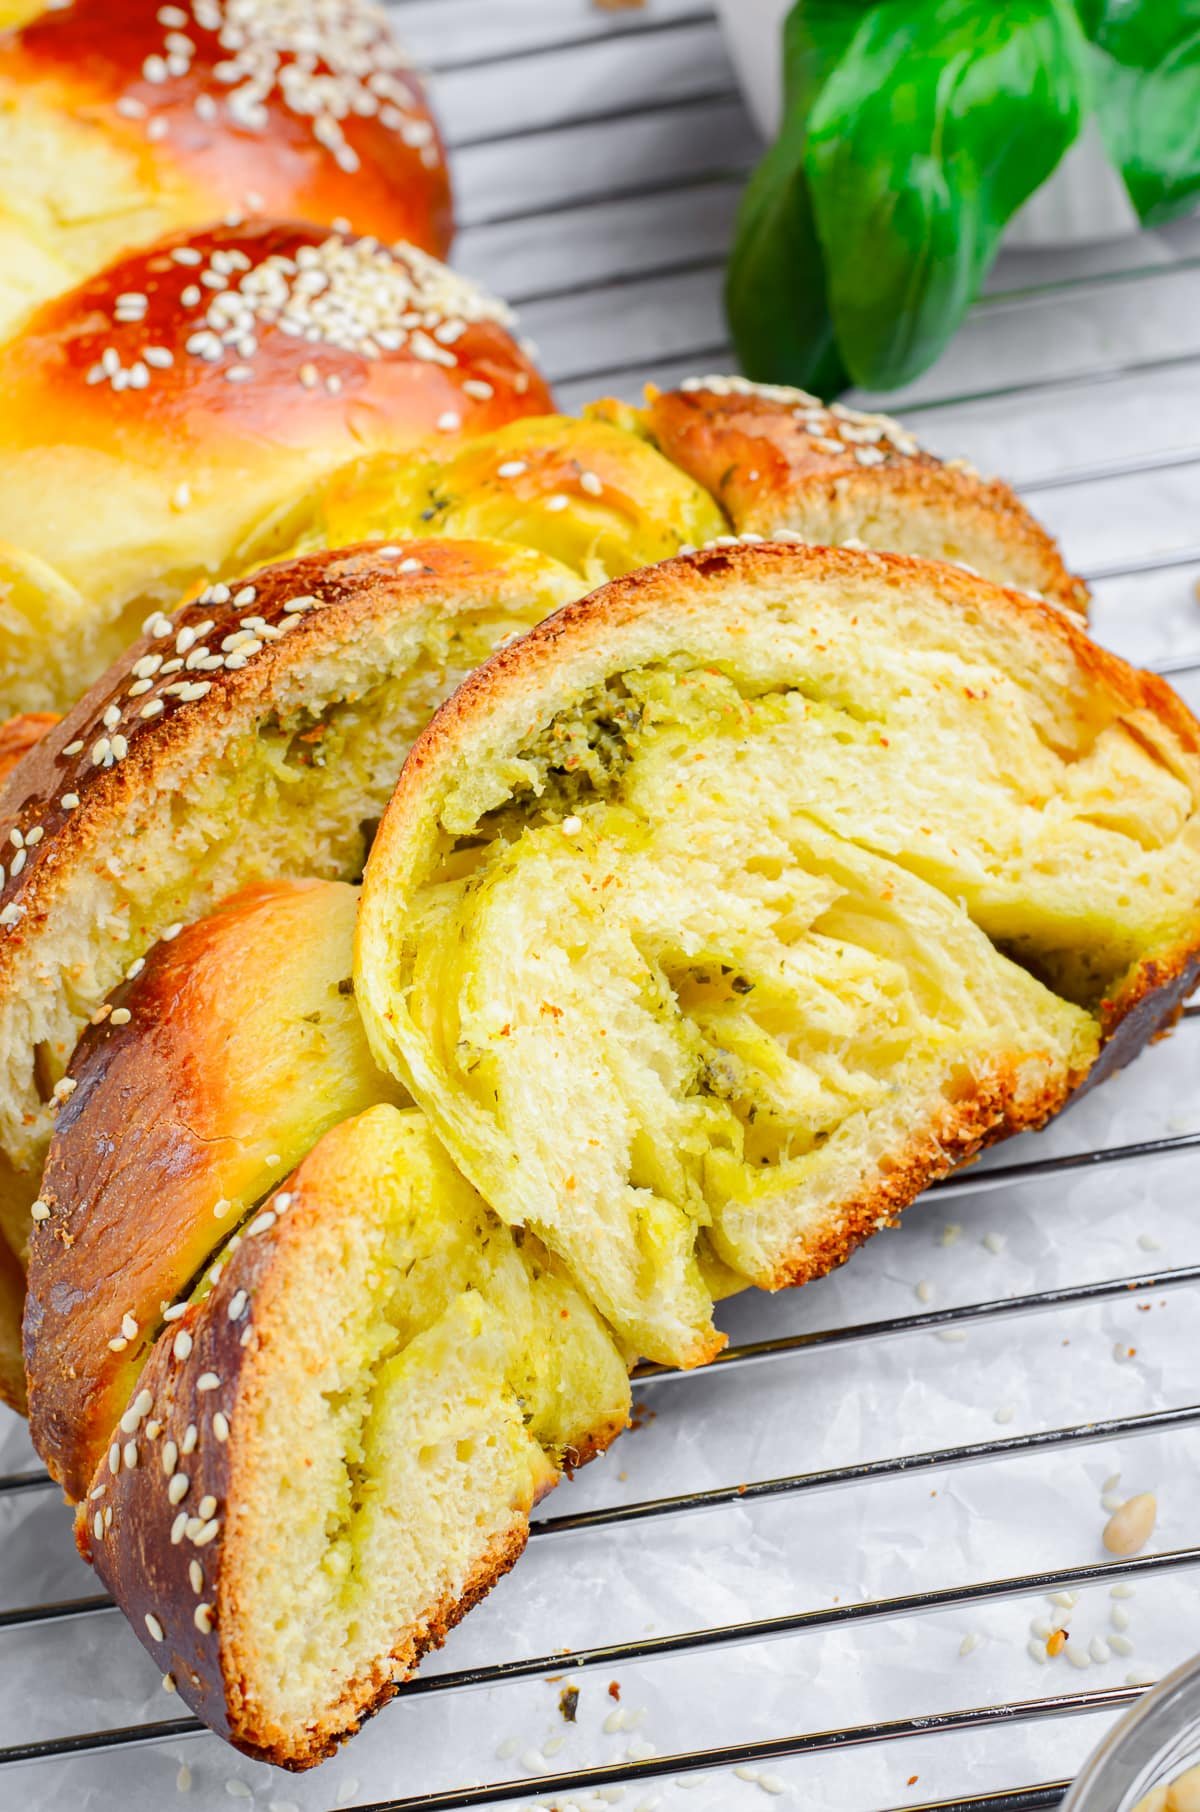 Upclose image of a slice of best challah recipe so you can see the filling